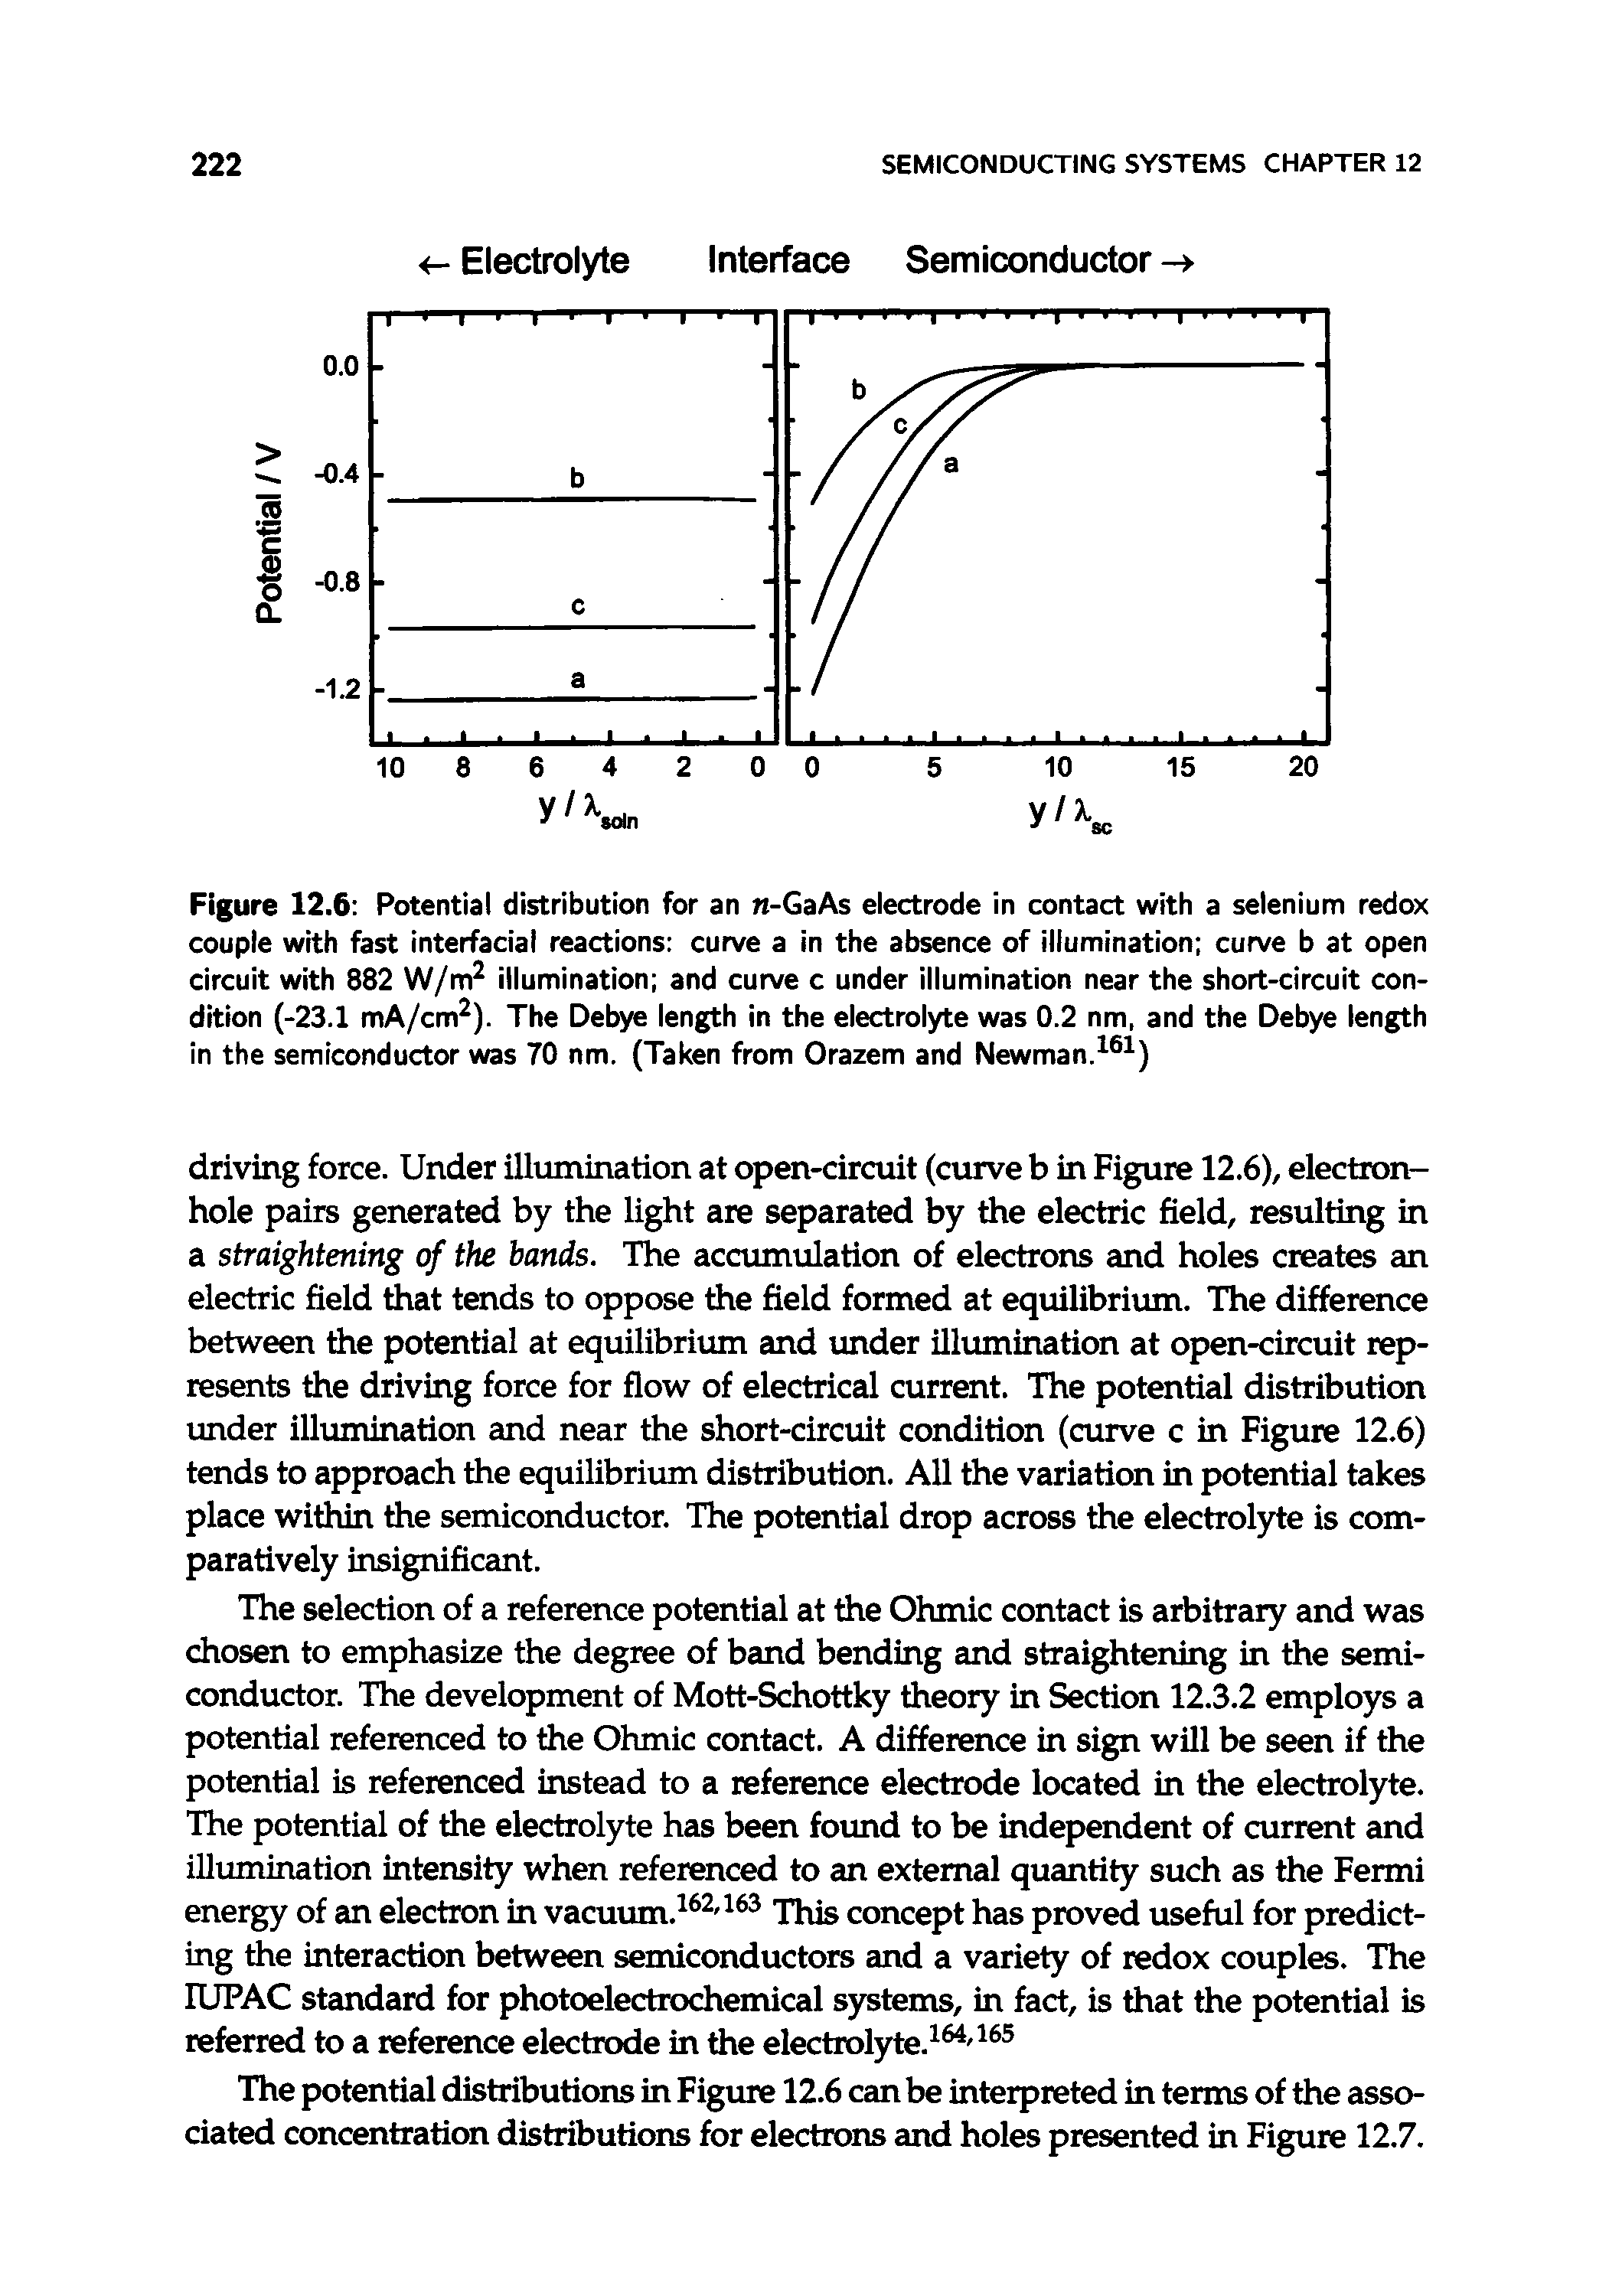 Figure 12.6 Potential distribution for an n-GaAs electrode in contact with a selenium redox couple with fast interfacial reactions curve a in the absence of illumination curve b at open circuit with 882 W/m illumination and curve c under illumination near the short-circuit condition (-23.1 mA/cm ). The Debye length in the electrolyte was 0.2 nm, and the Debye length in the semiconductor was 70 nm. (Taken from Orazem and Newman.